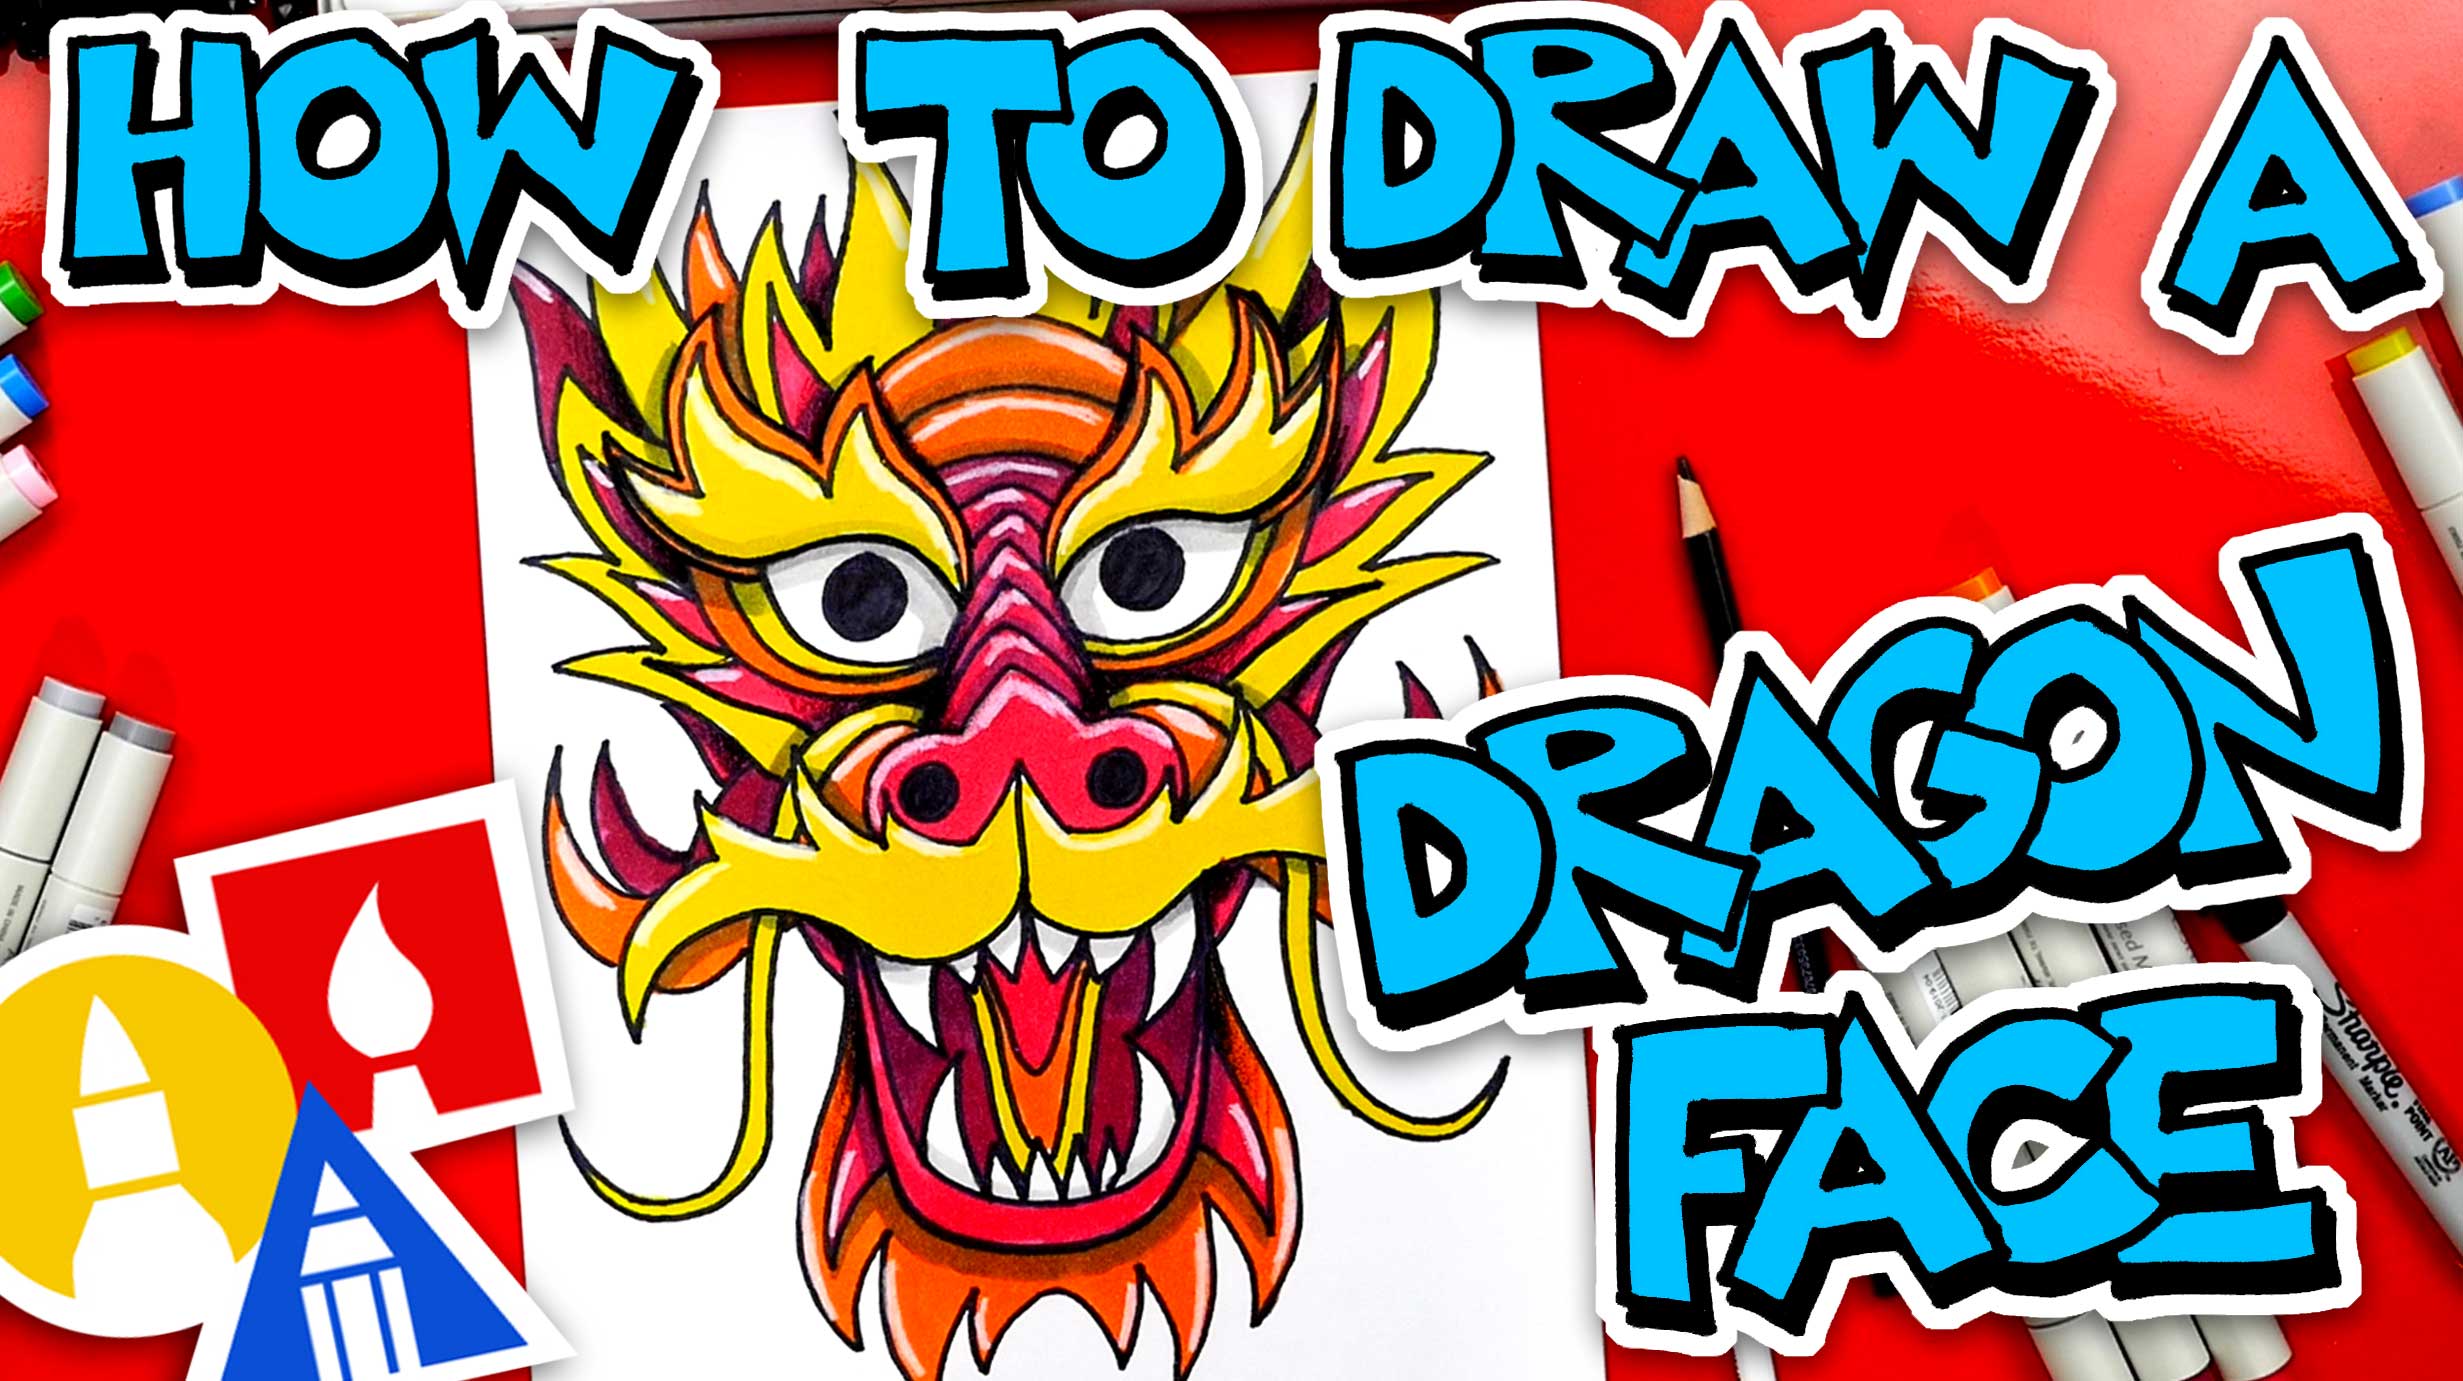 How To Draw A Chinese Dragon Face Art For Kids Hub